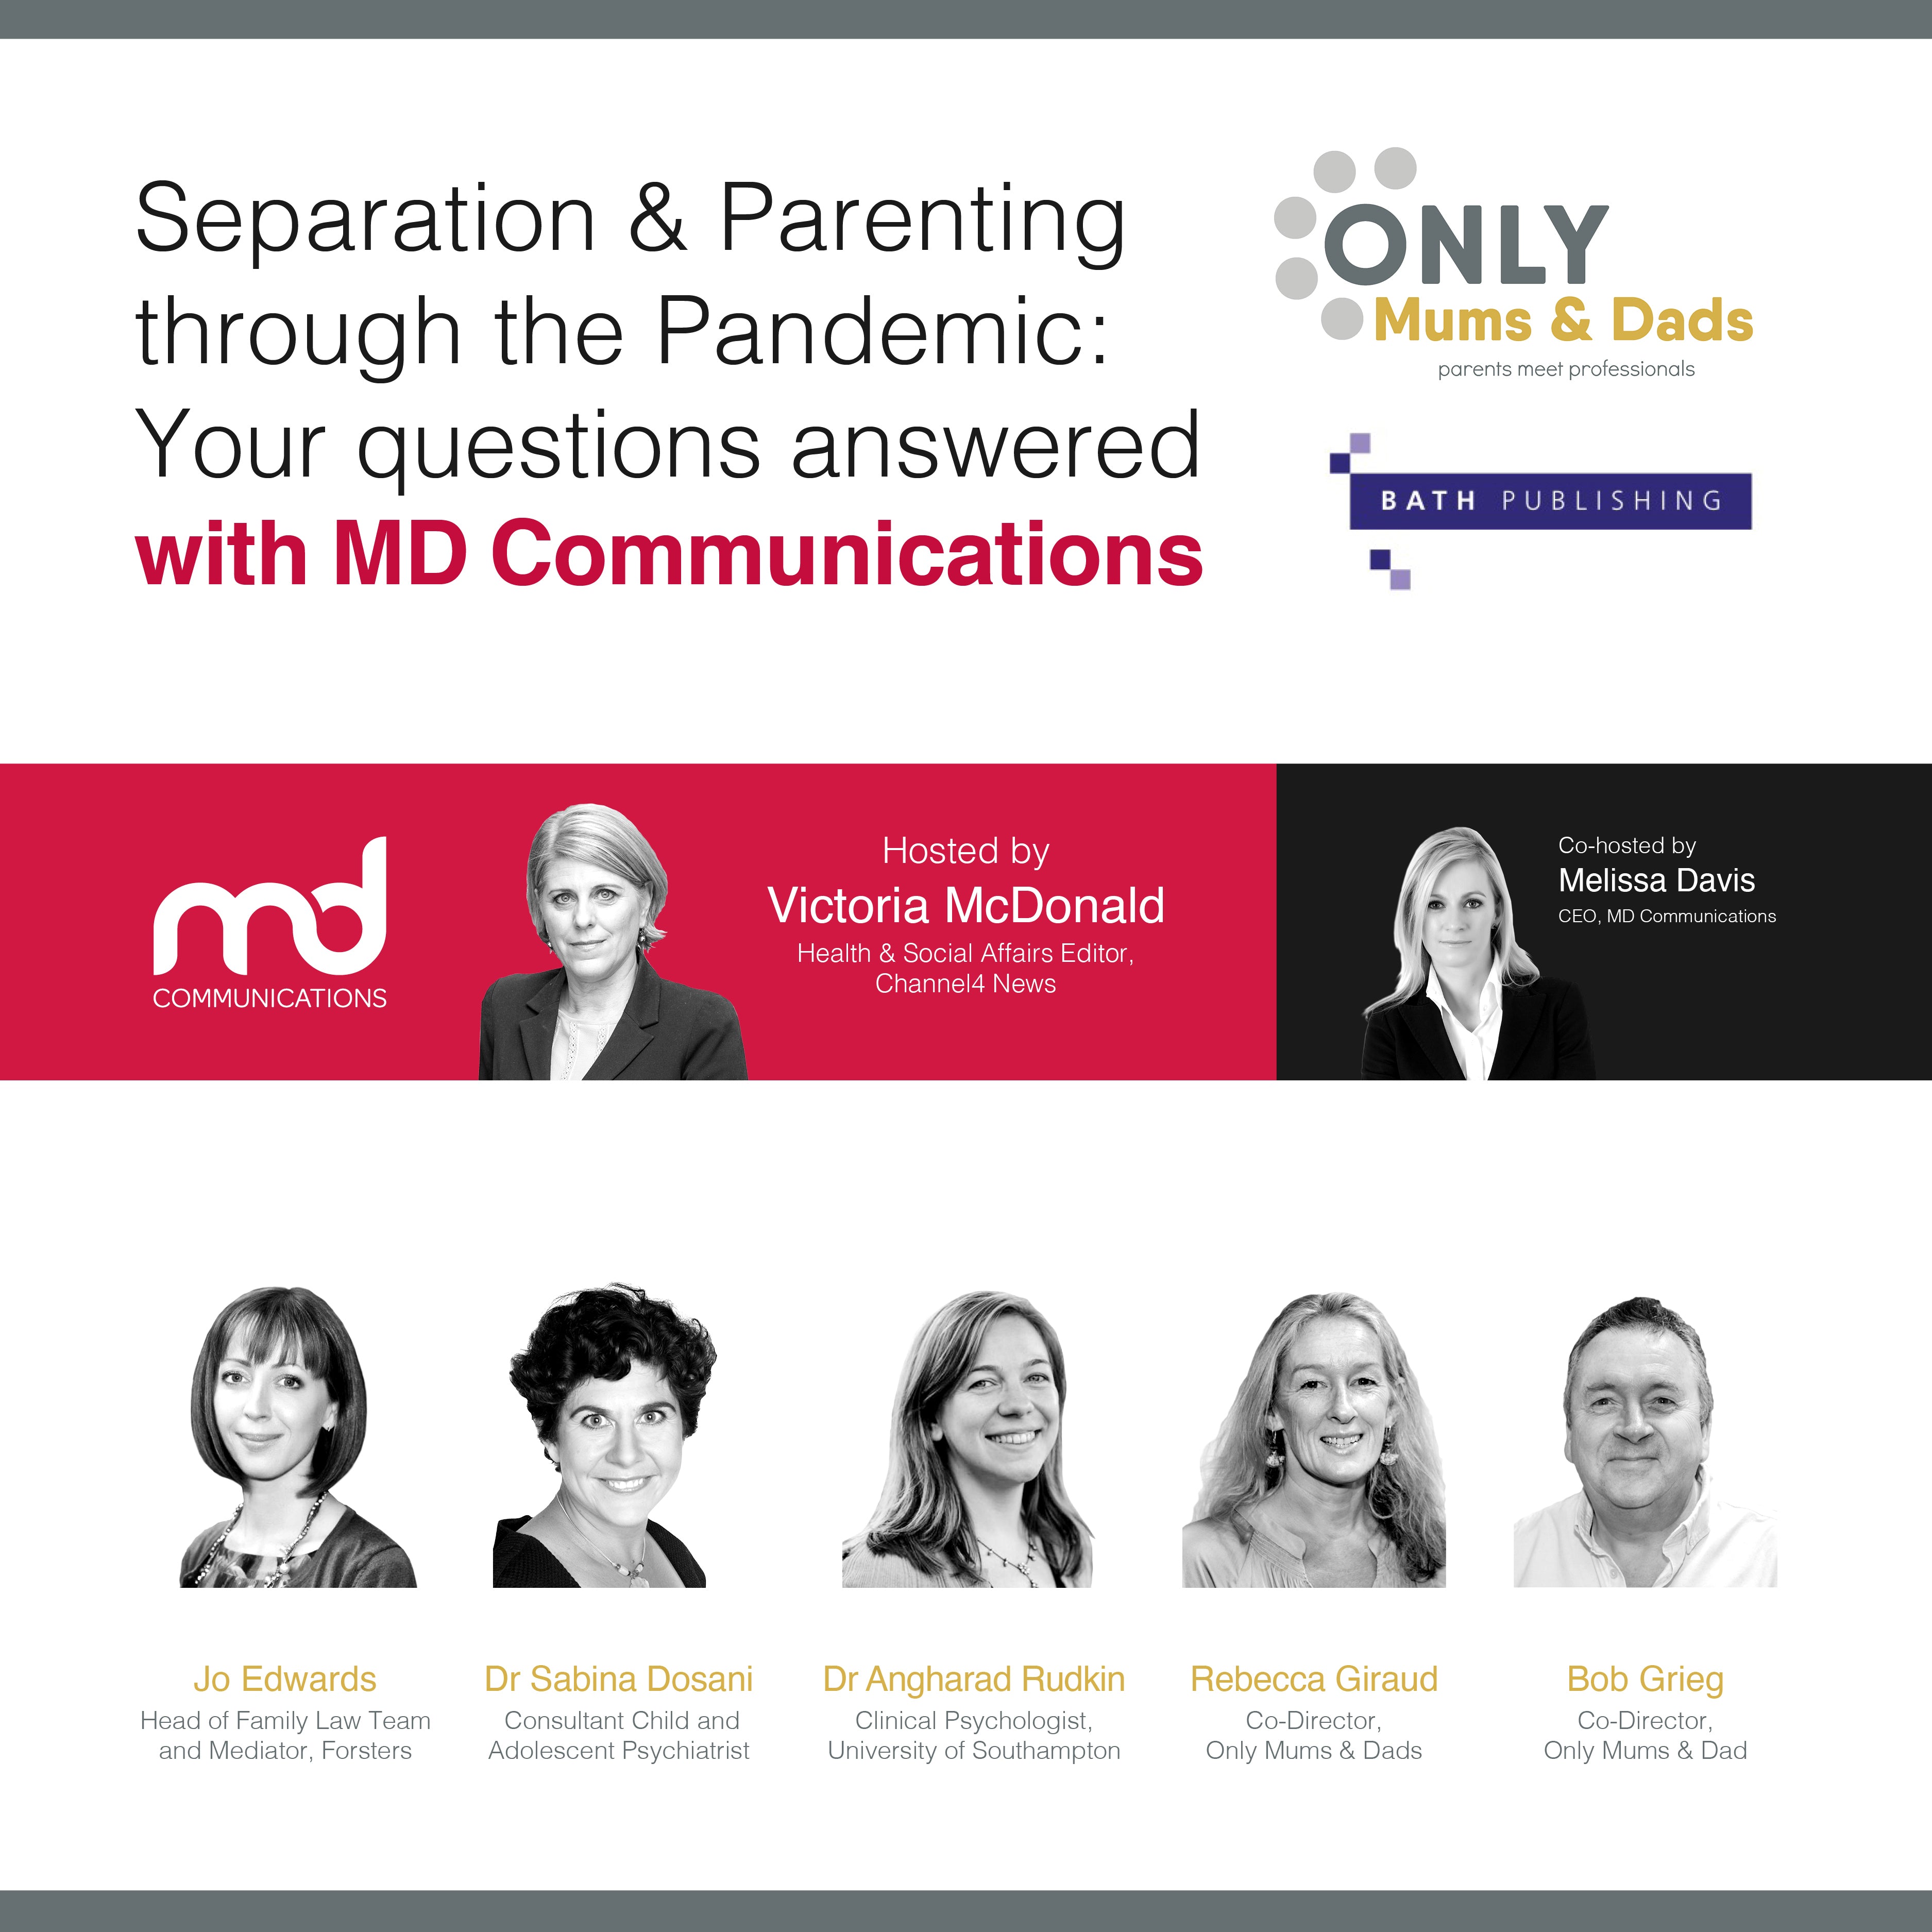 WATCH AGAIN: Separation & Parenting through the Pandemic: Your Questions Answered